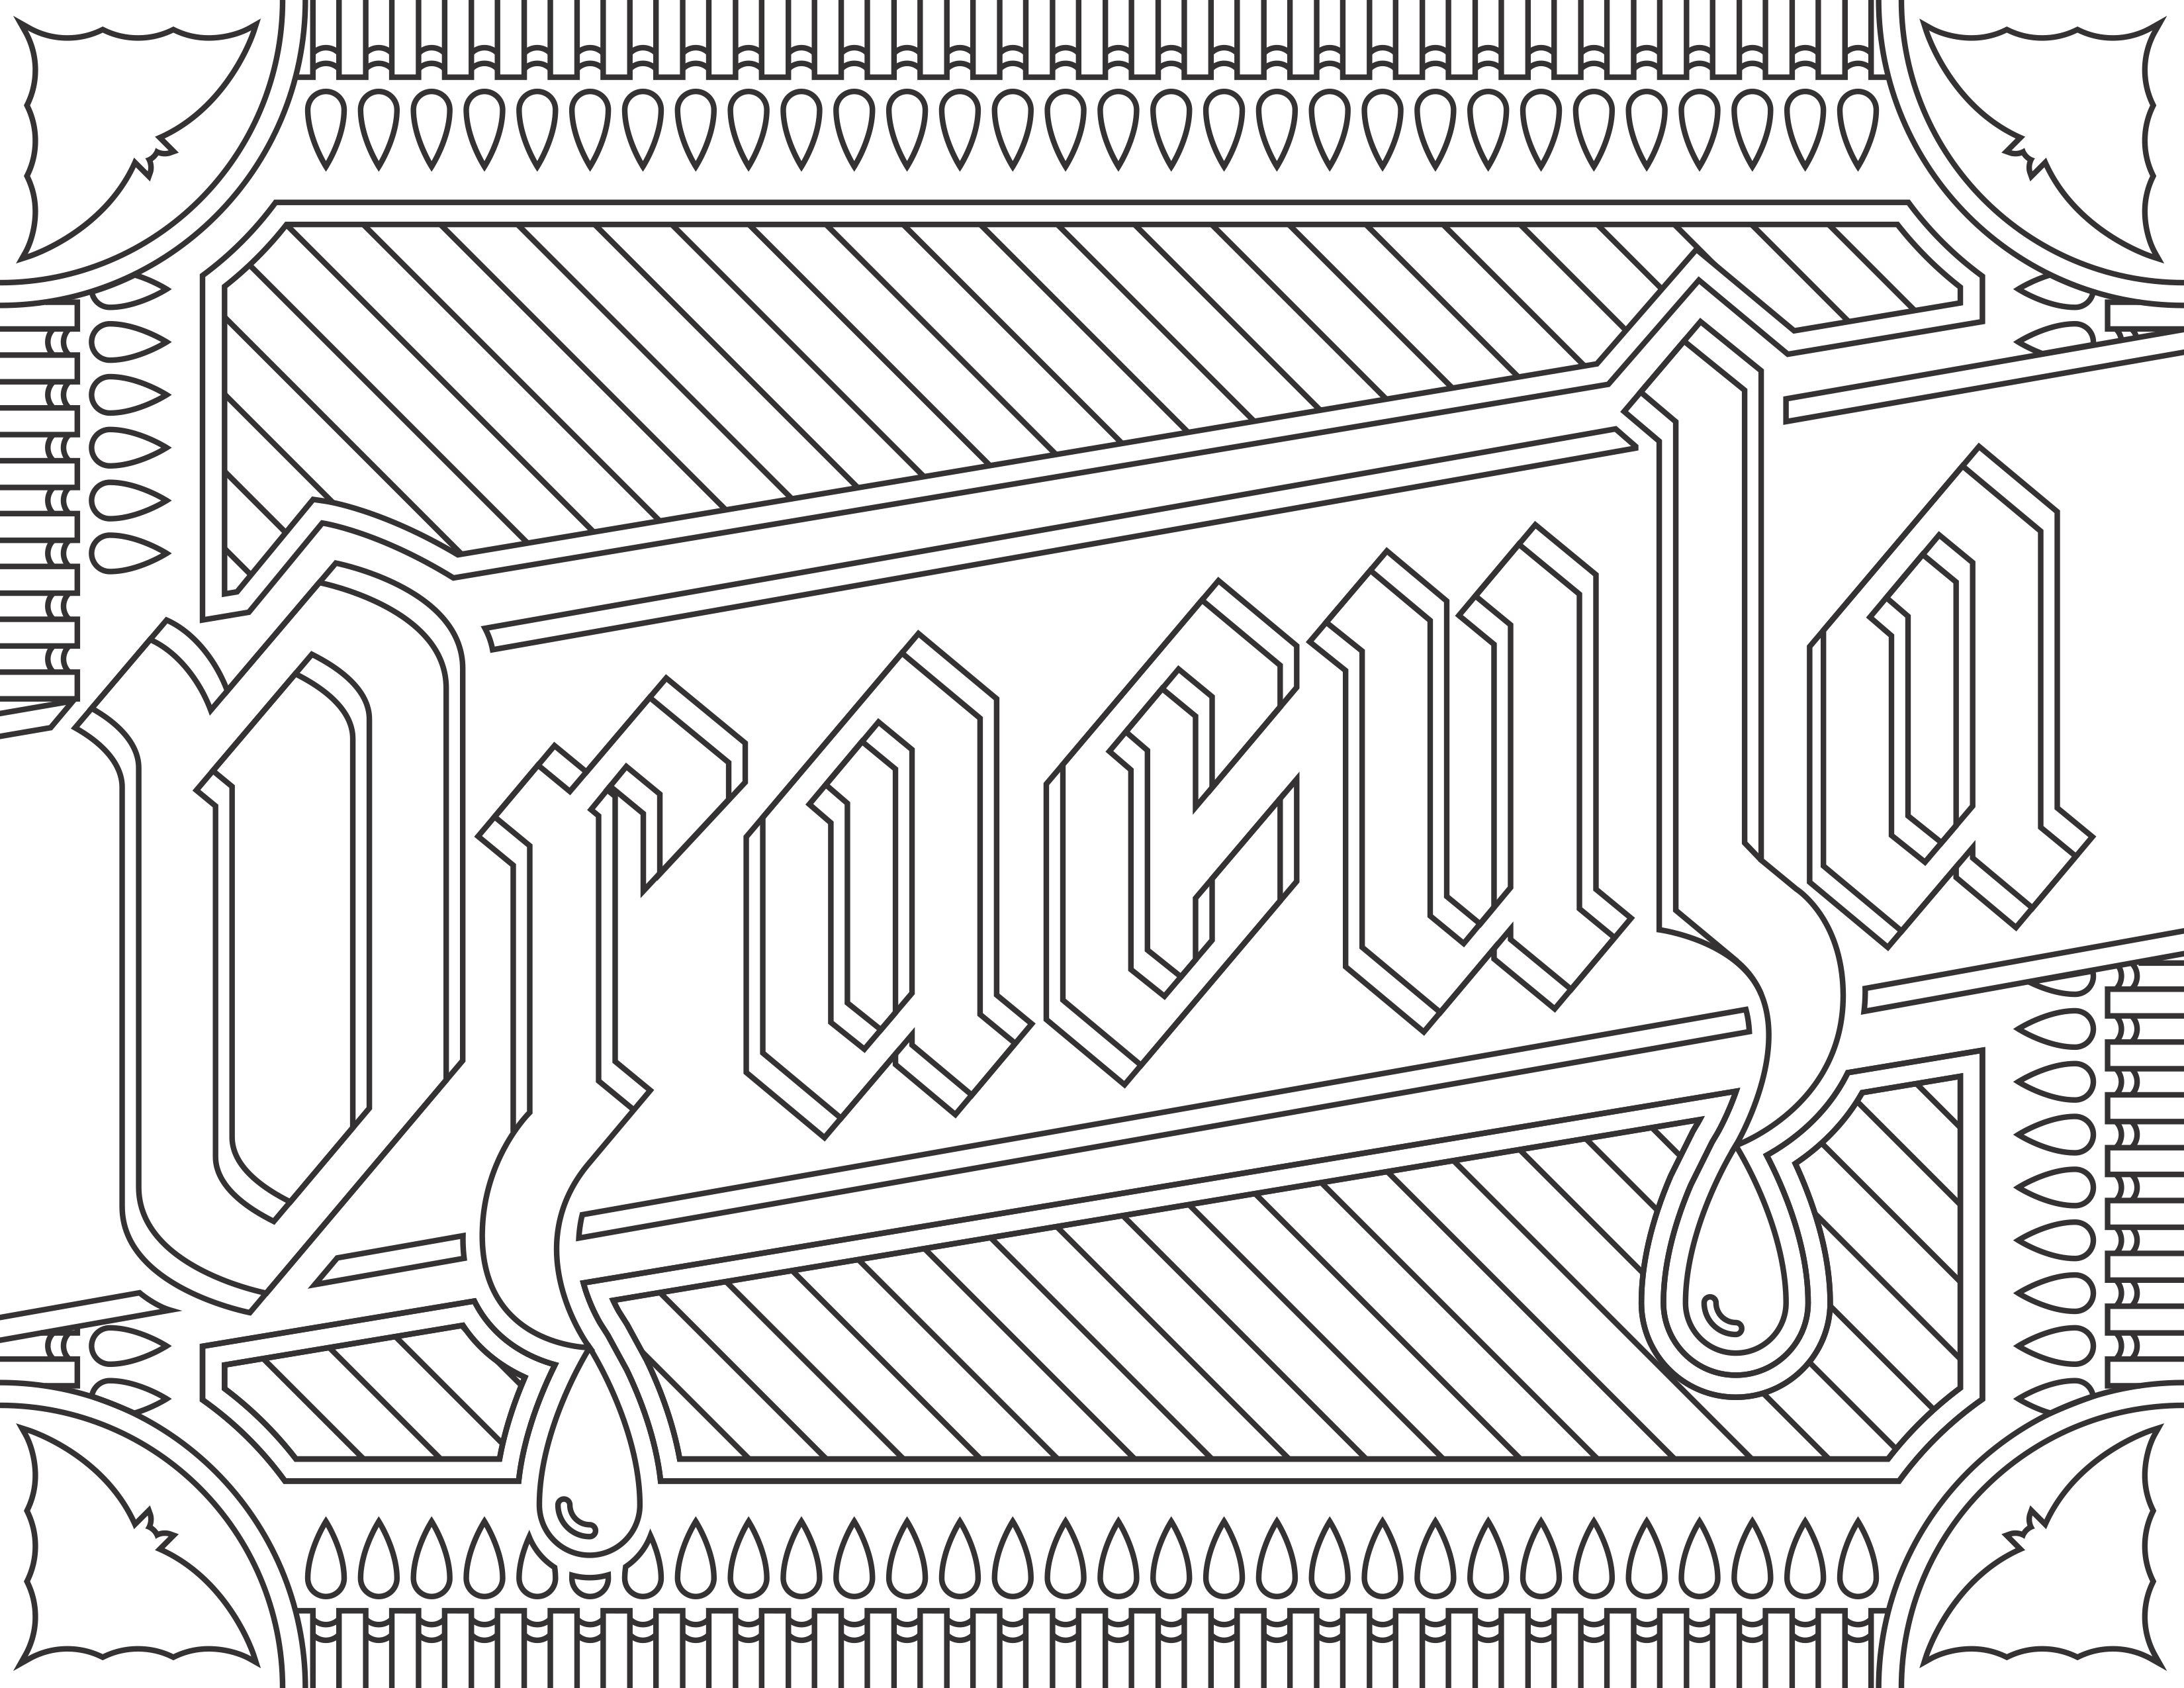 Coloring page inspired by the Movie 'Dracula', for the website Readers.com.